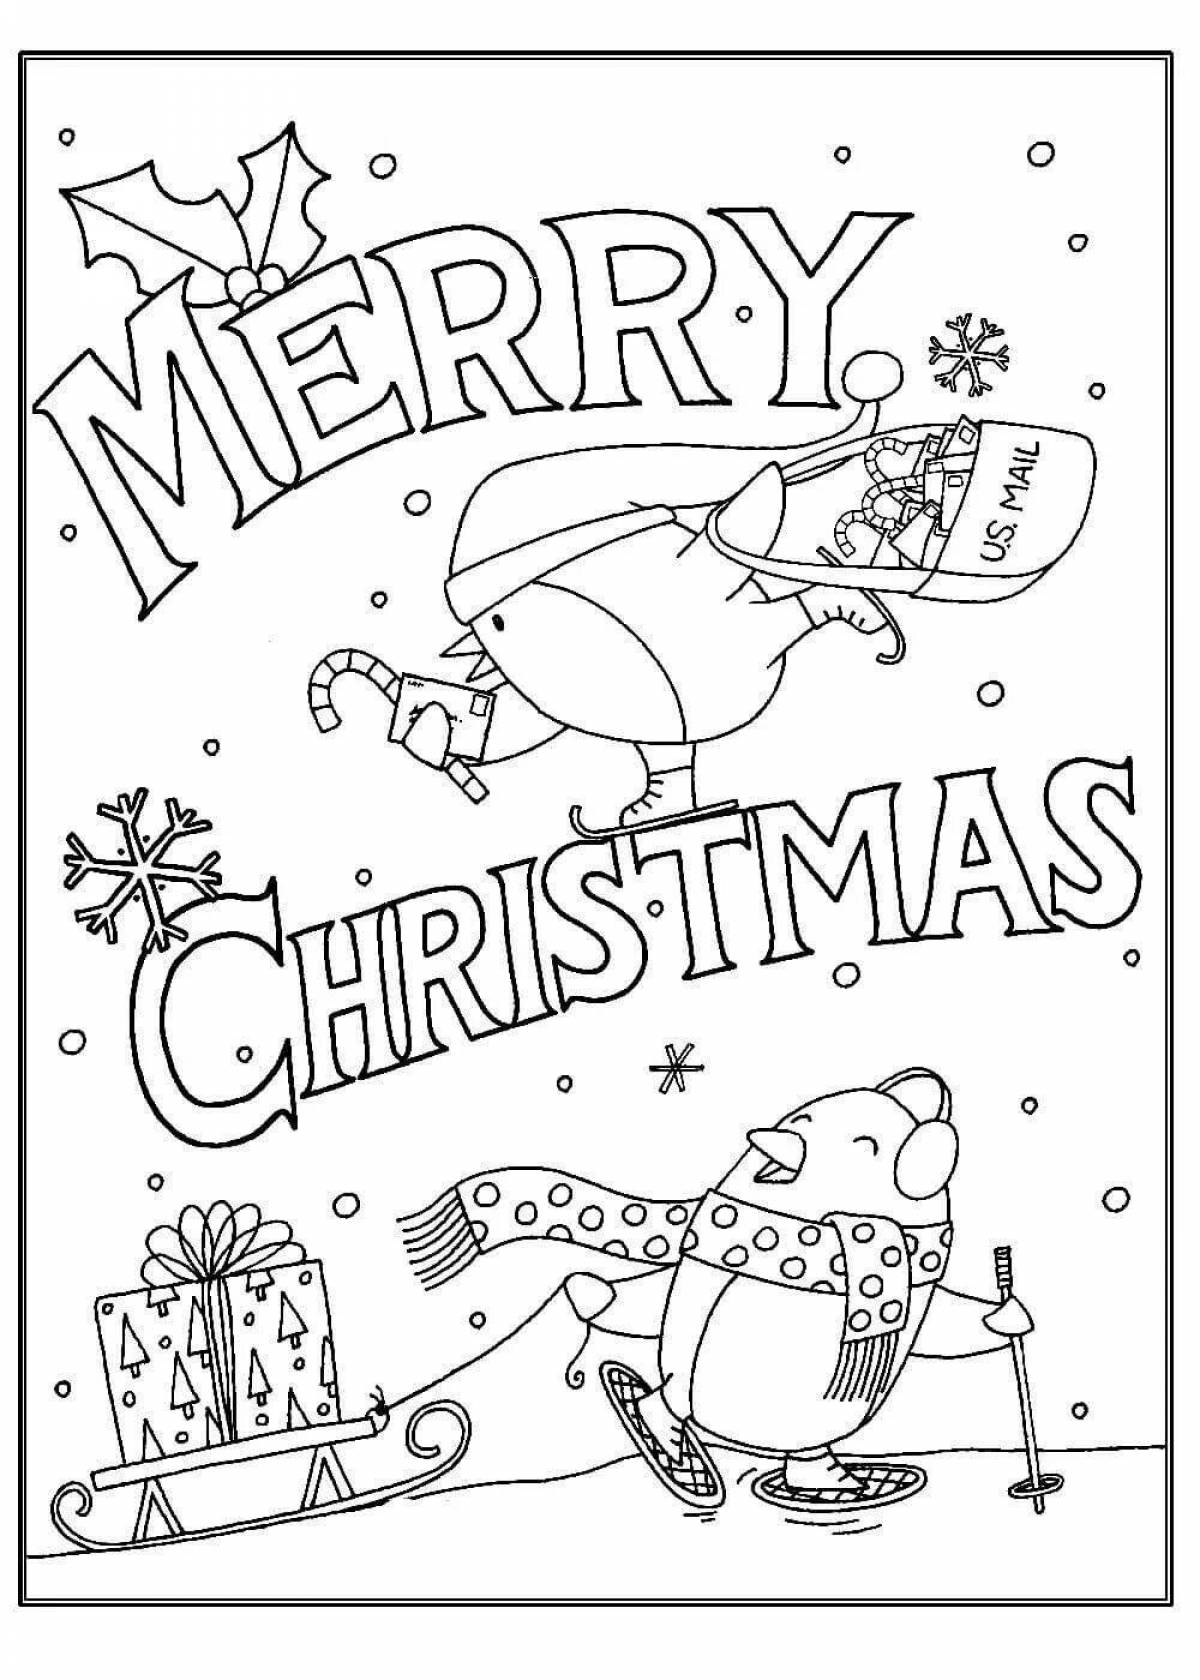 Comic coloring book with christmas card